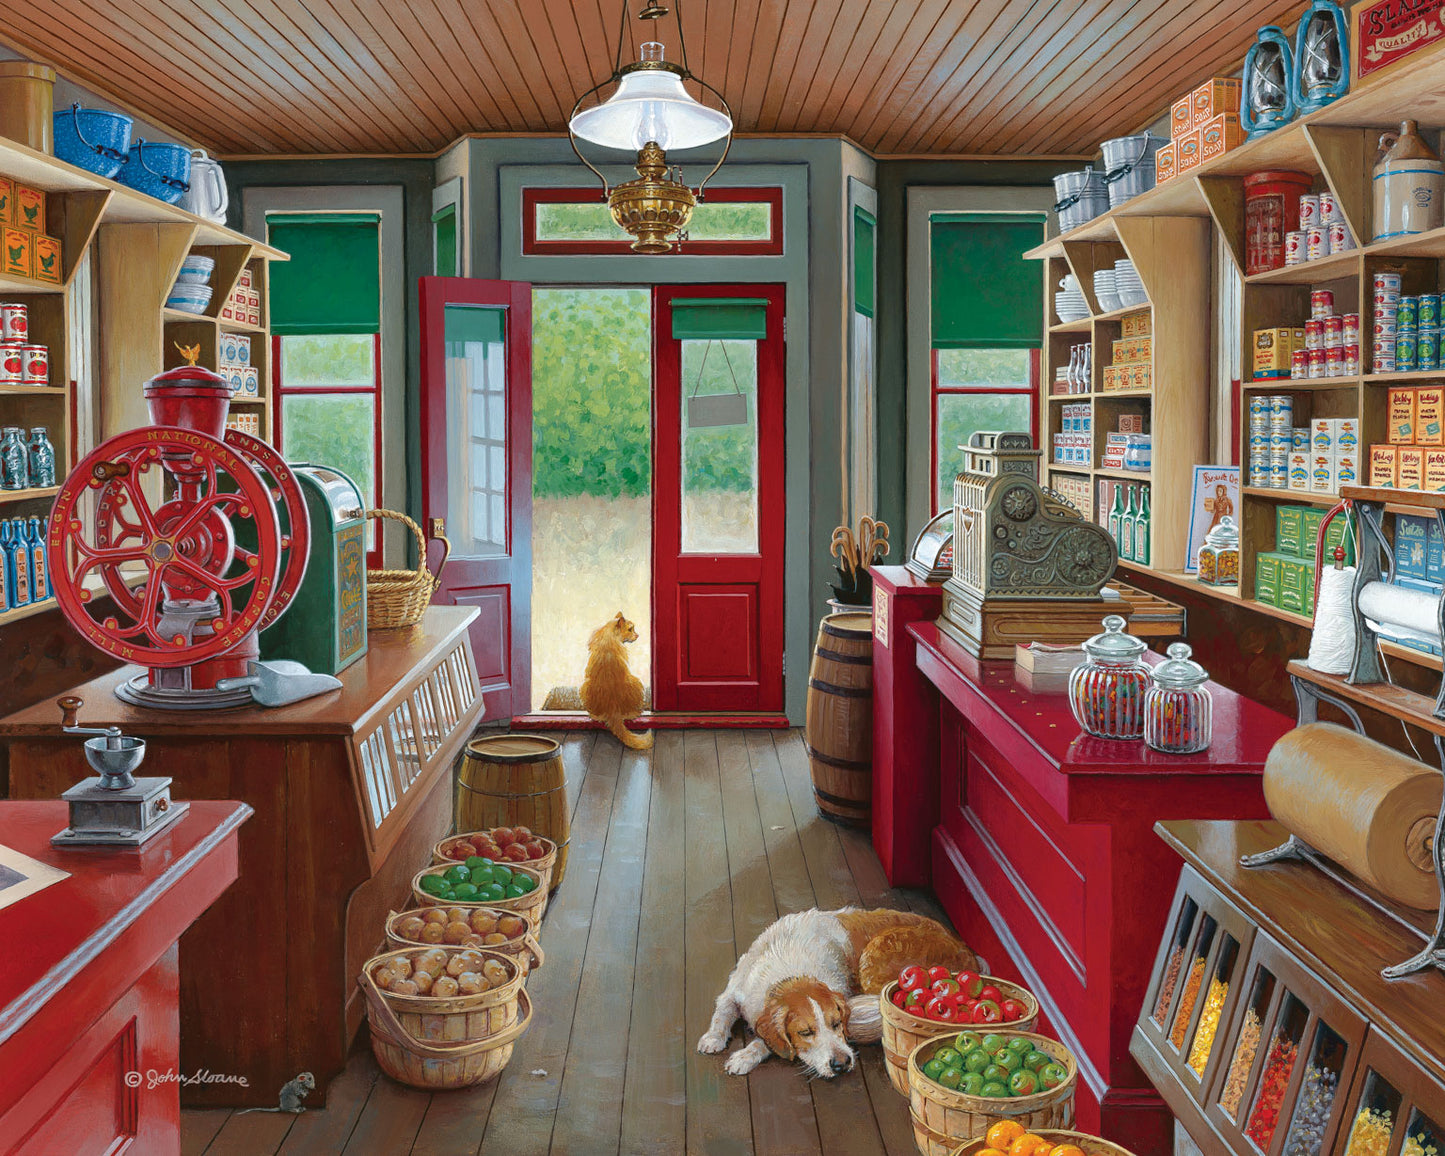 Slow Day - Puzzle by John Sloane